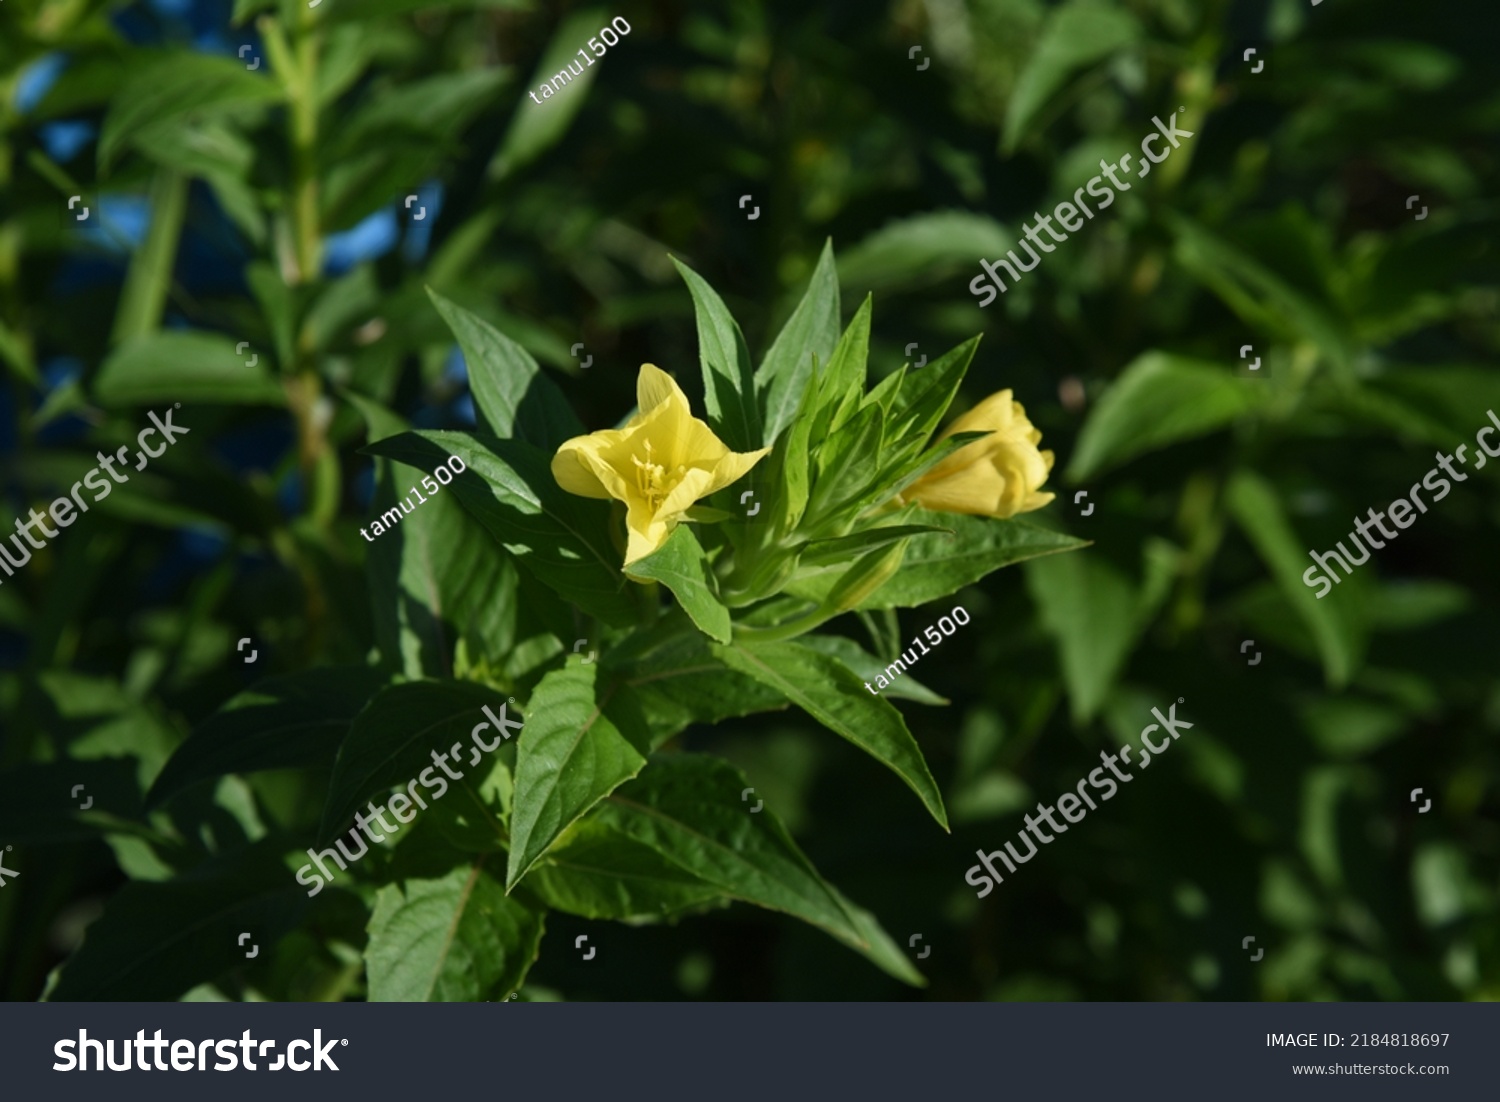 Oenothera biennis ( Common evening primrose ) flowers. Onagraceae biennial plants. Yellow four-petaled flowers bloom at night and wilt the next morning. #2184818697